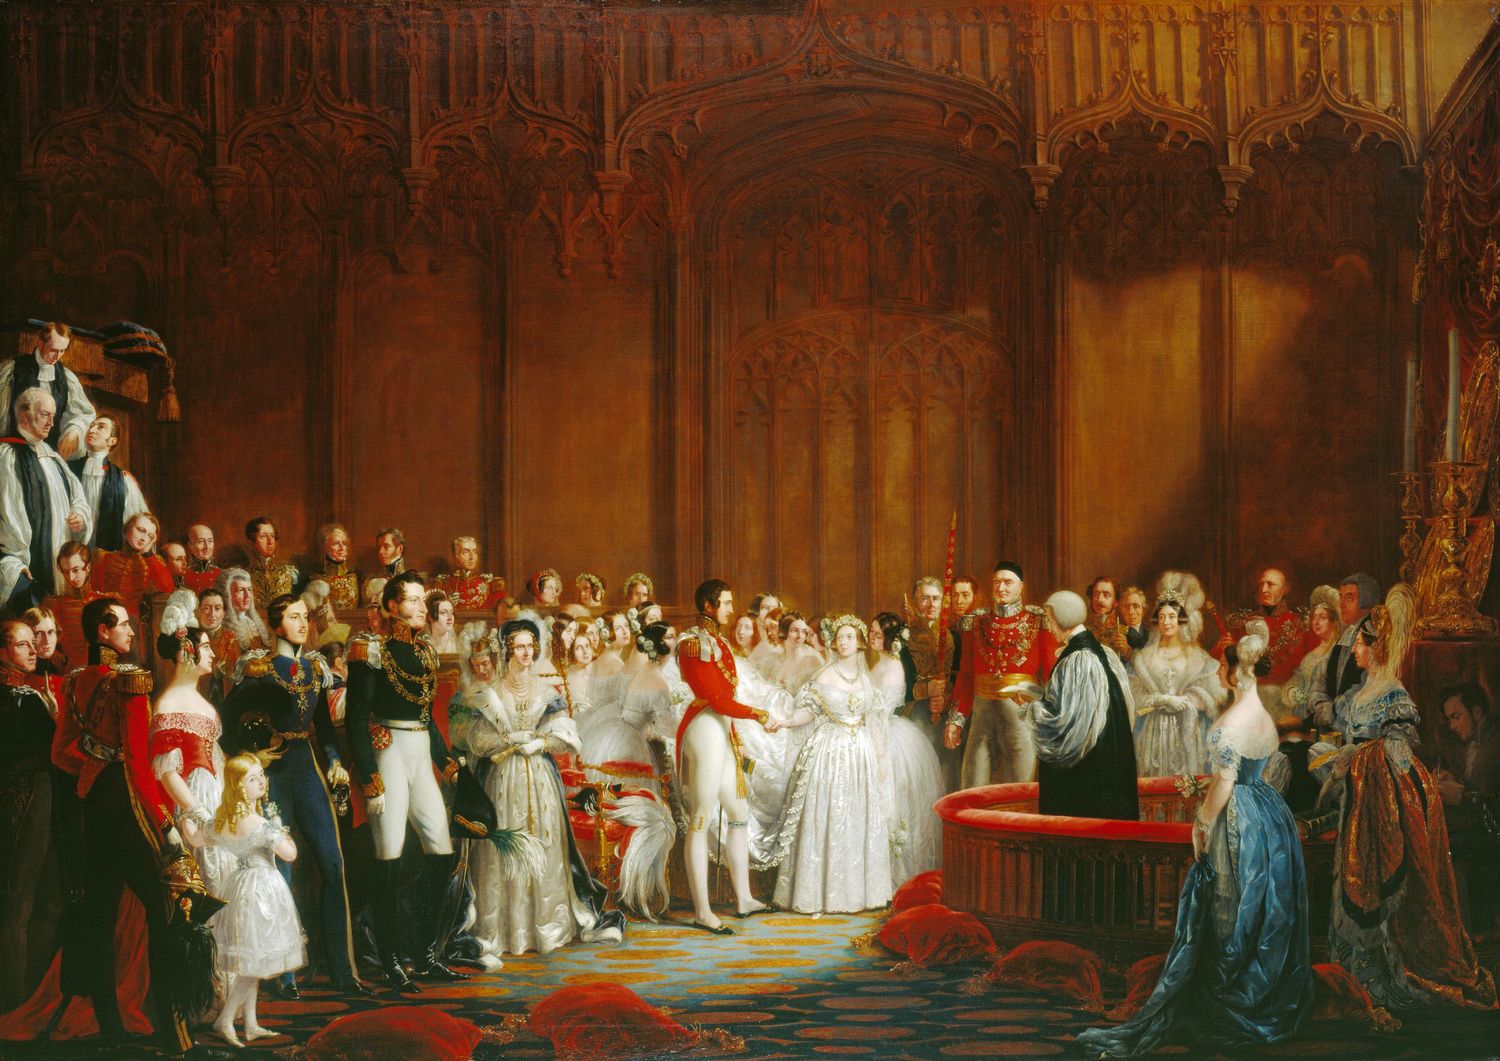 The Marriage of Queen Victoria, 10 February 1840 by George Hayter